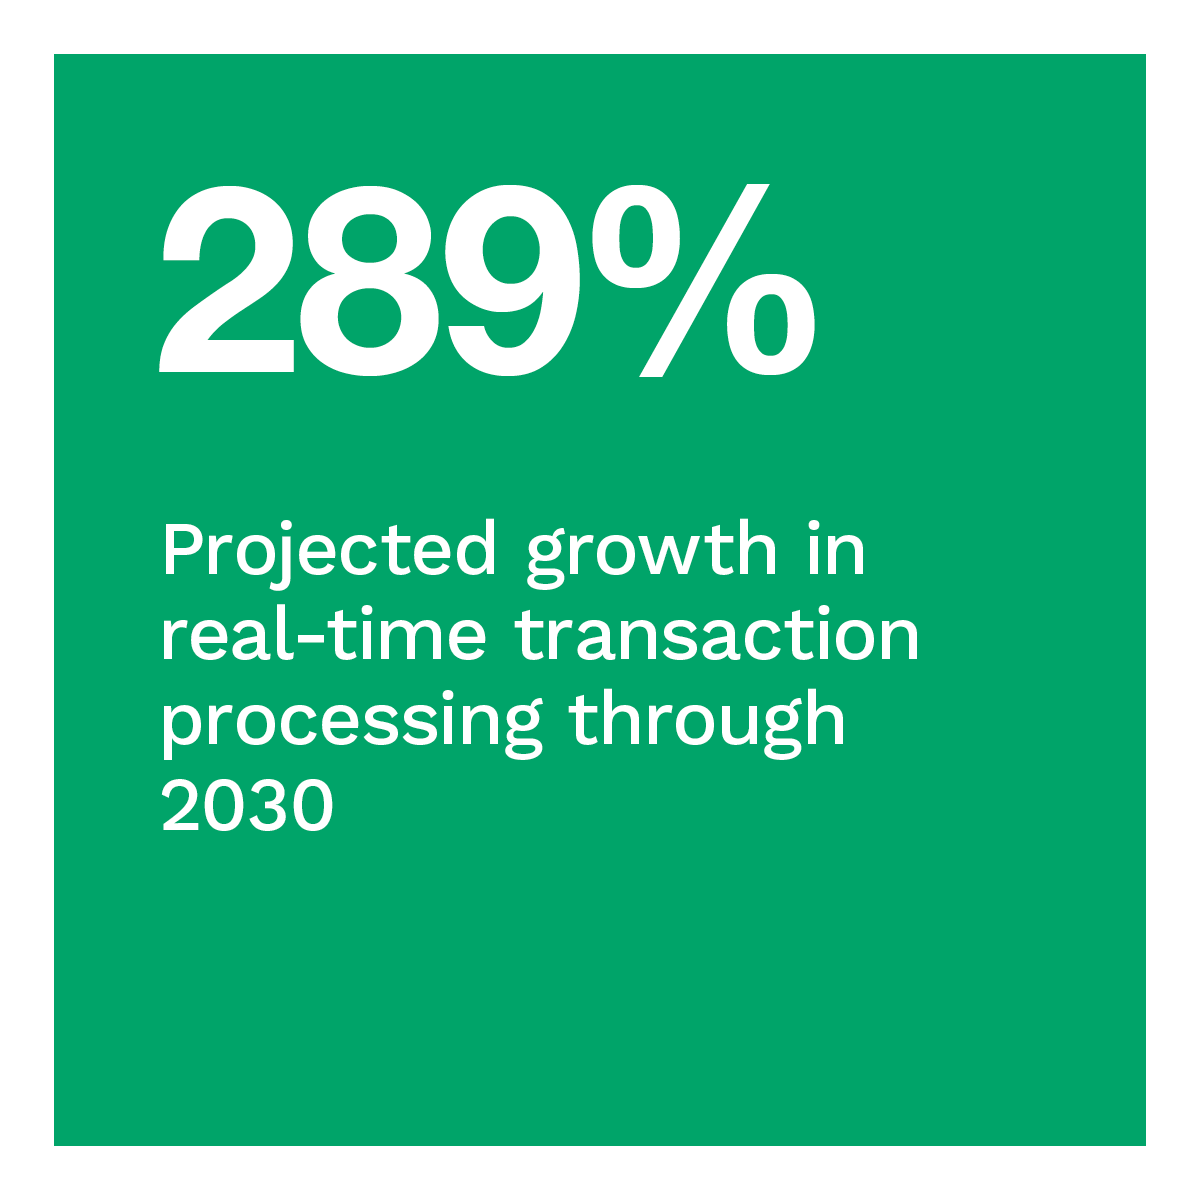 289%: Projected growth in real-time transaction processing through 2030